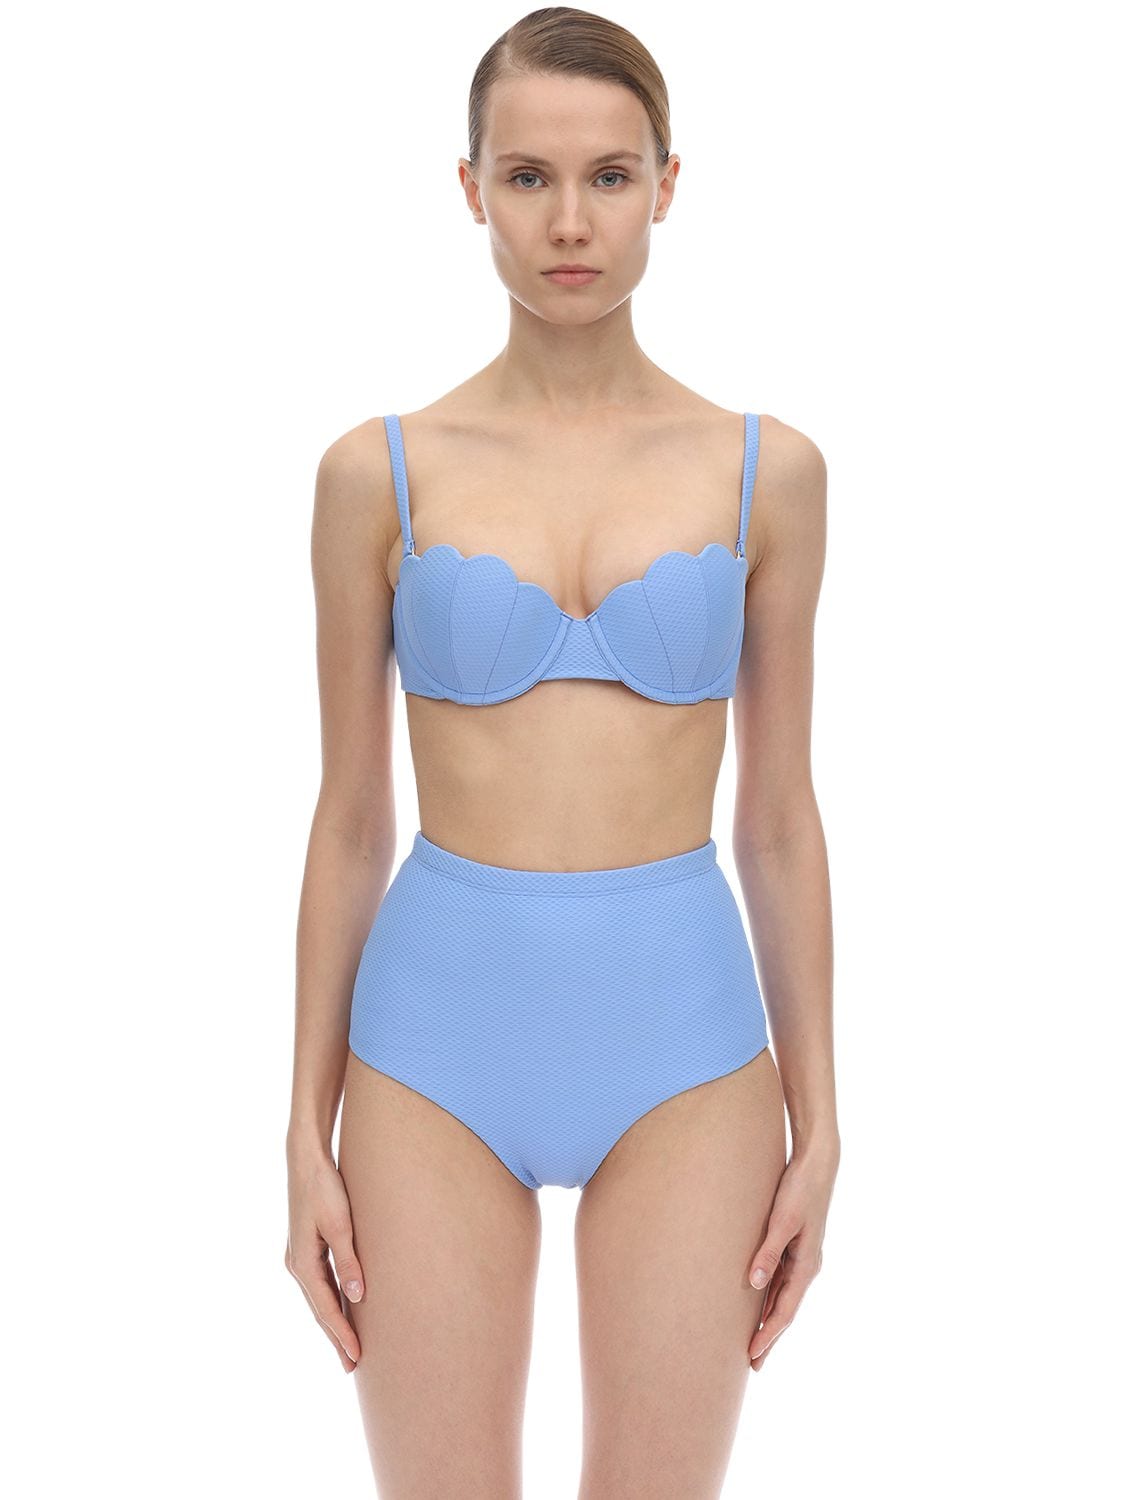 Arabella London The Contour Textured Top W/ Underwire In Light Blue